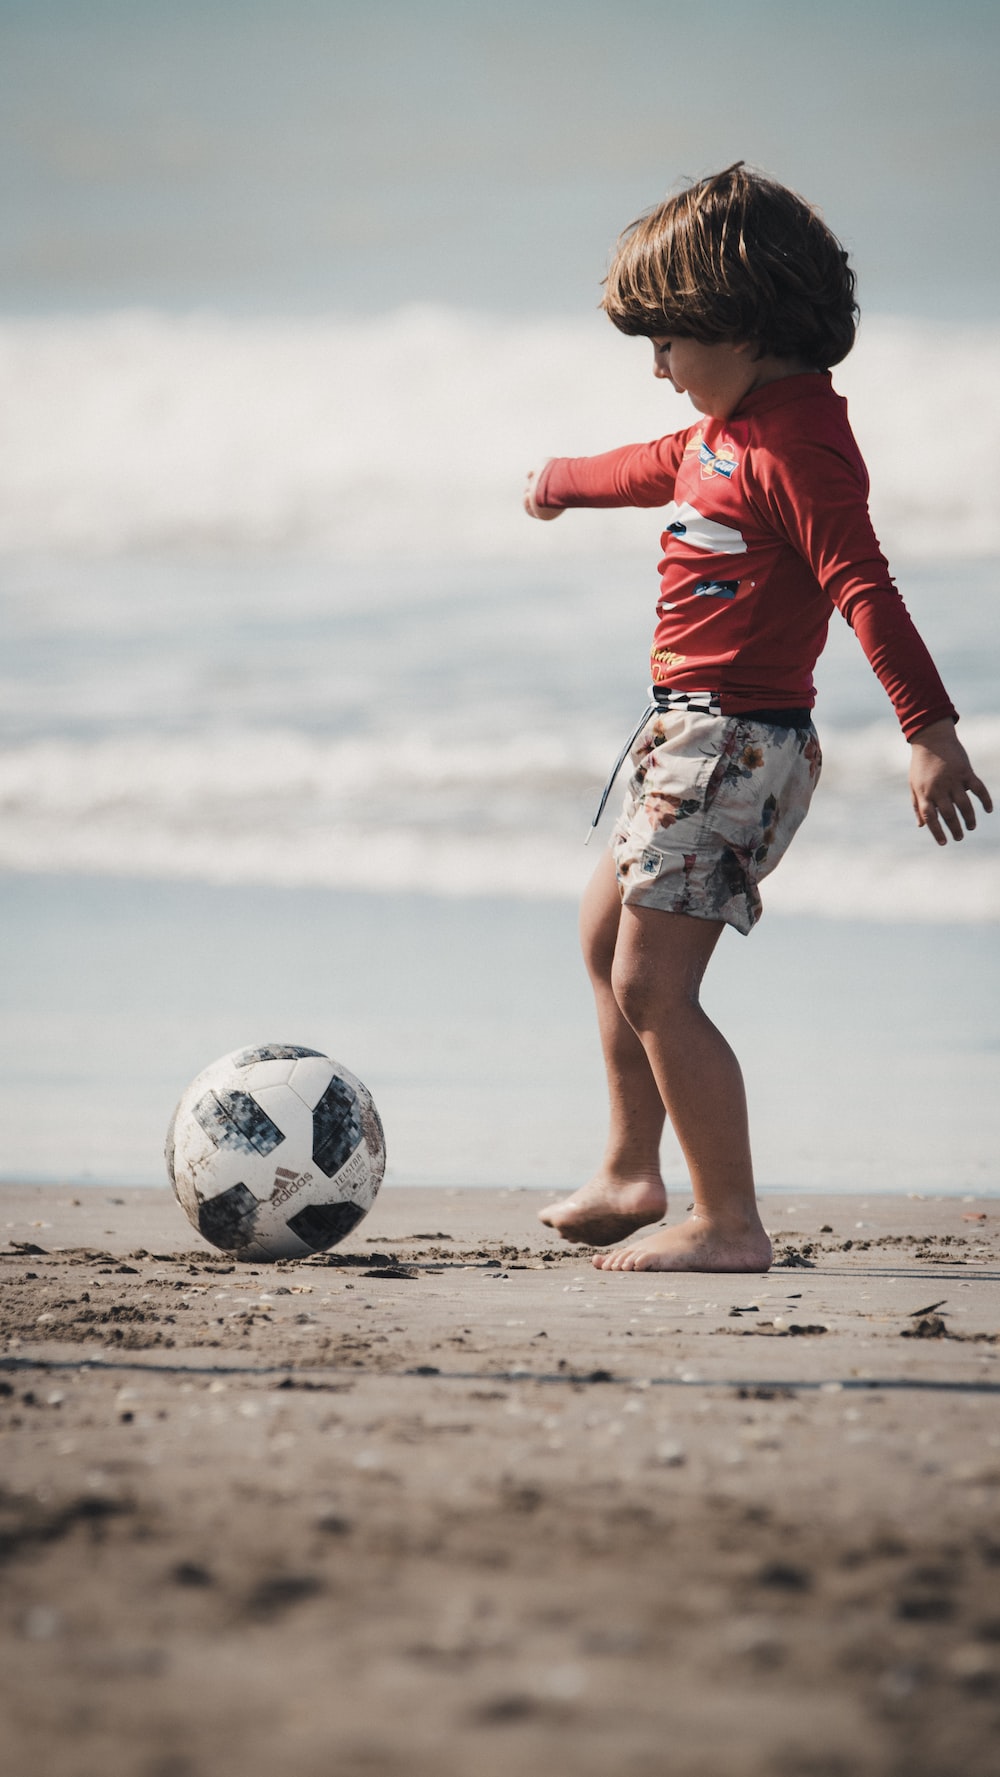 Children Football Picture. Download Free Image